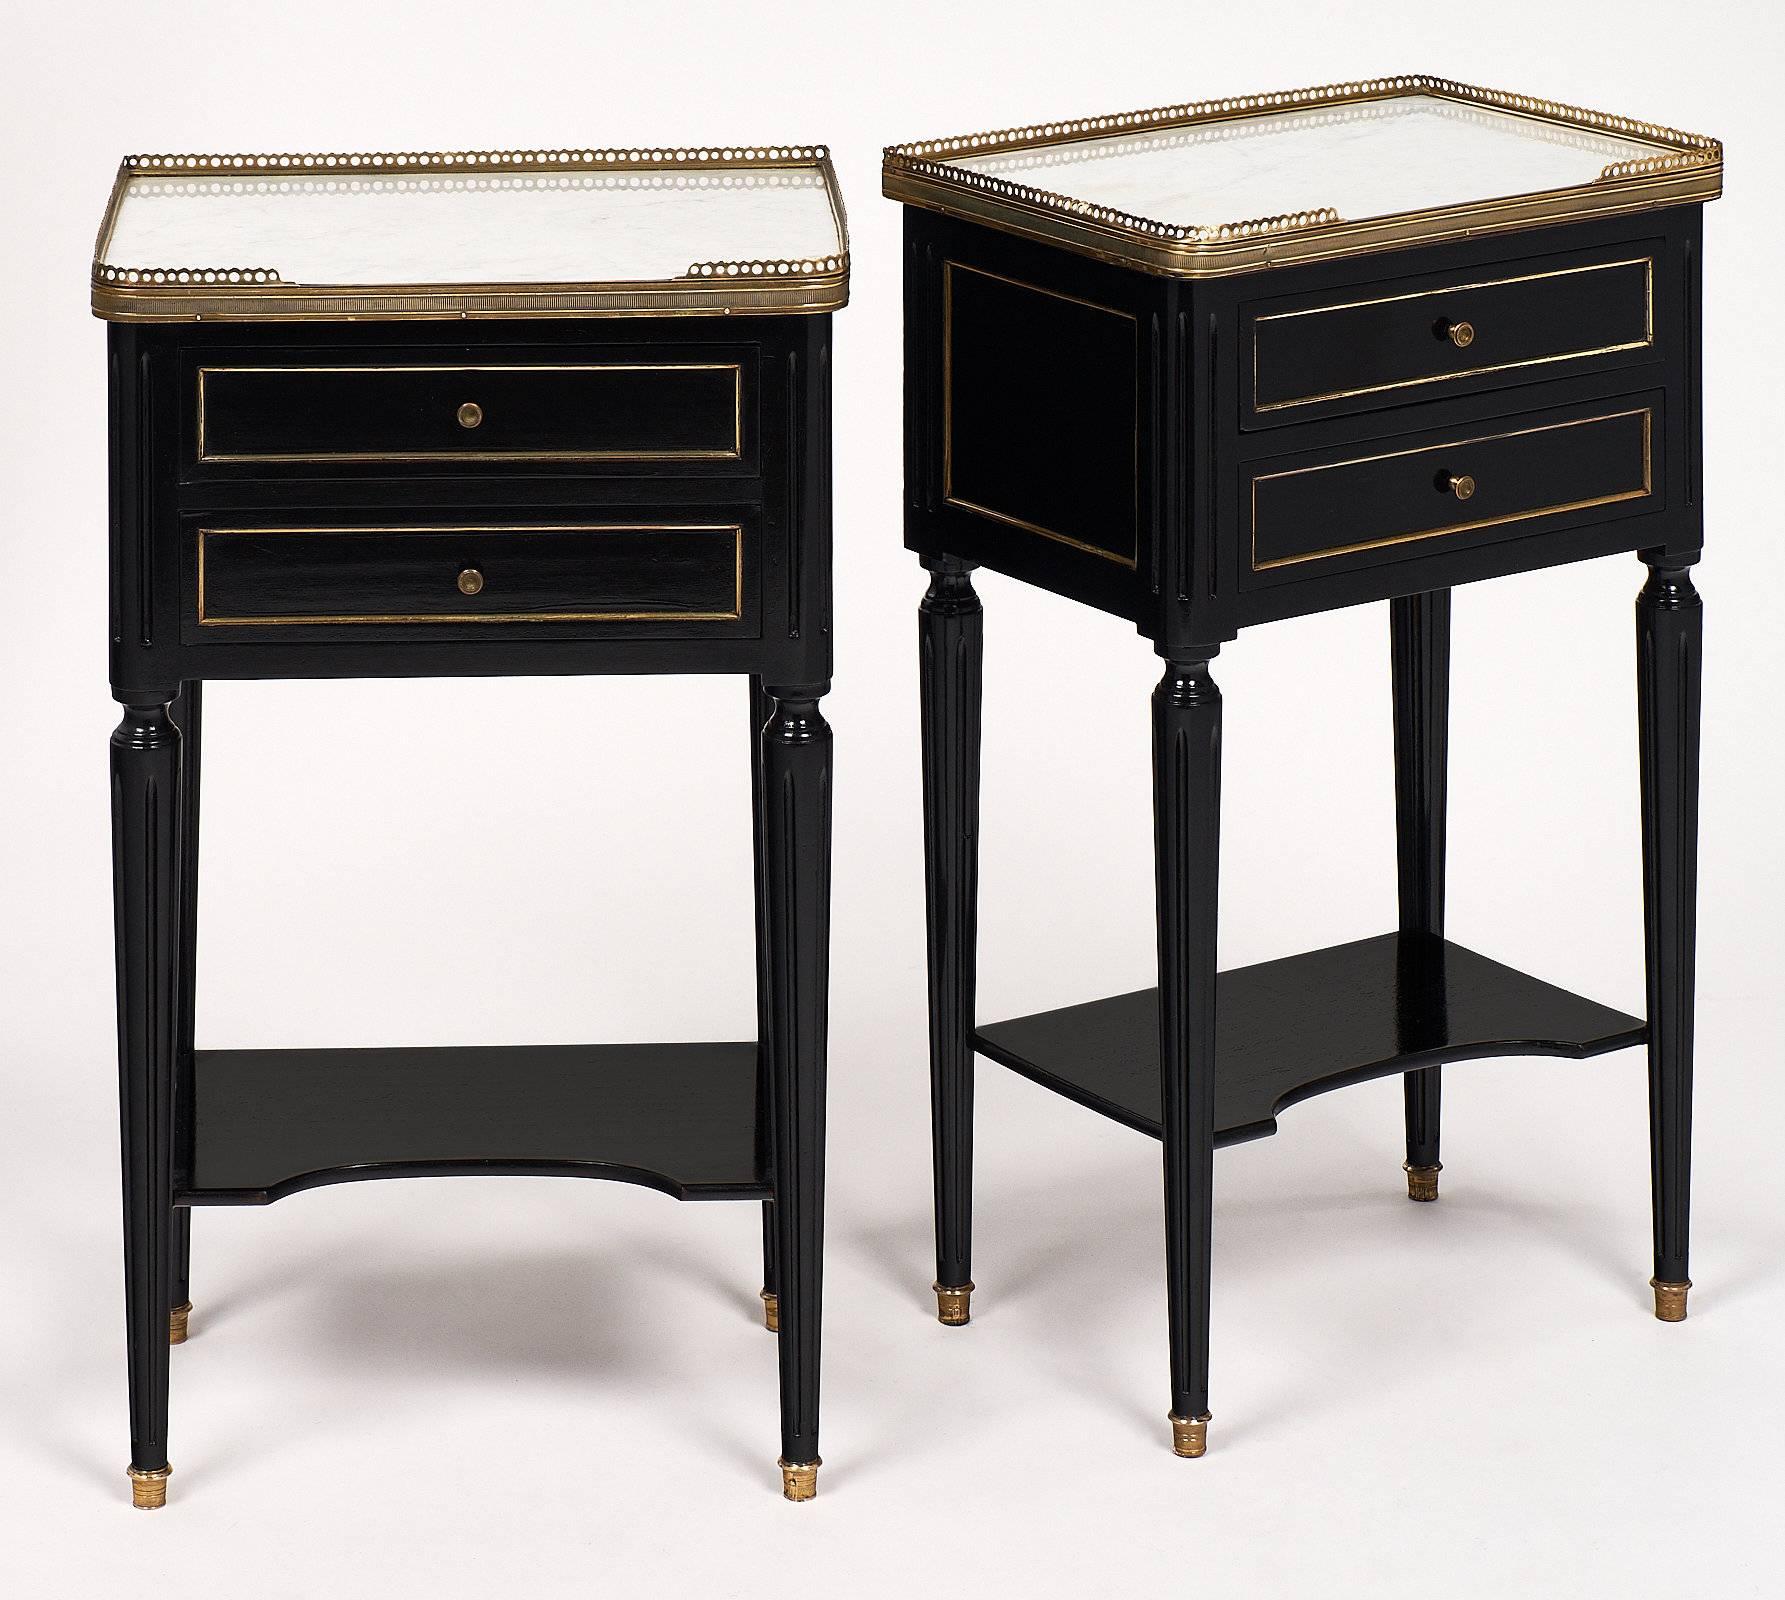 French Louis XVI style pair of mahogany side chests with beautiful Carrara marble tops, gilded brass galleries, and gilt brass trims throughout. The legs are tapered with brass feet. These will be perfect companions for your living area or guest bed